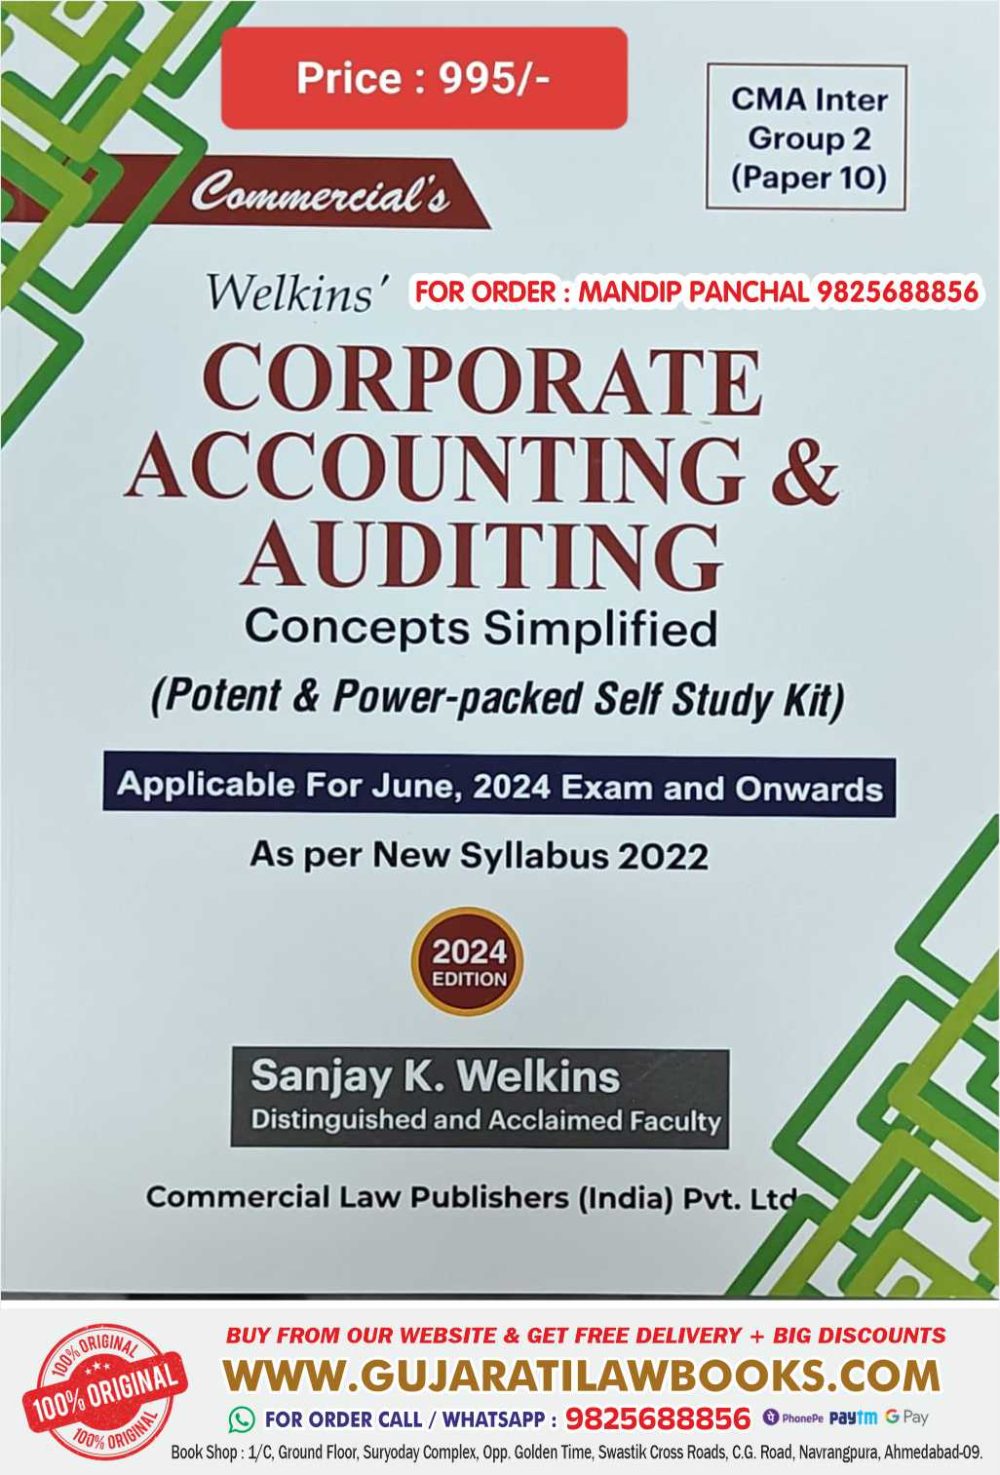 Commercial's WELKIN'S CORPORATE ACCOUNTING & AUDITING - For CMA Inter Group 2 - For June & Onwards 2024 Examination